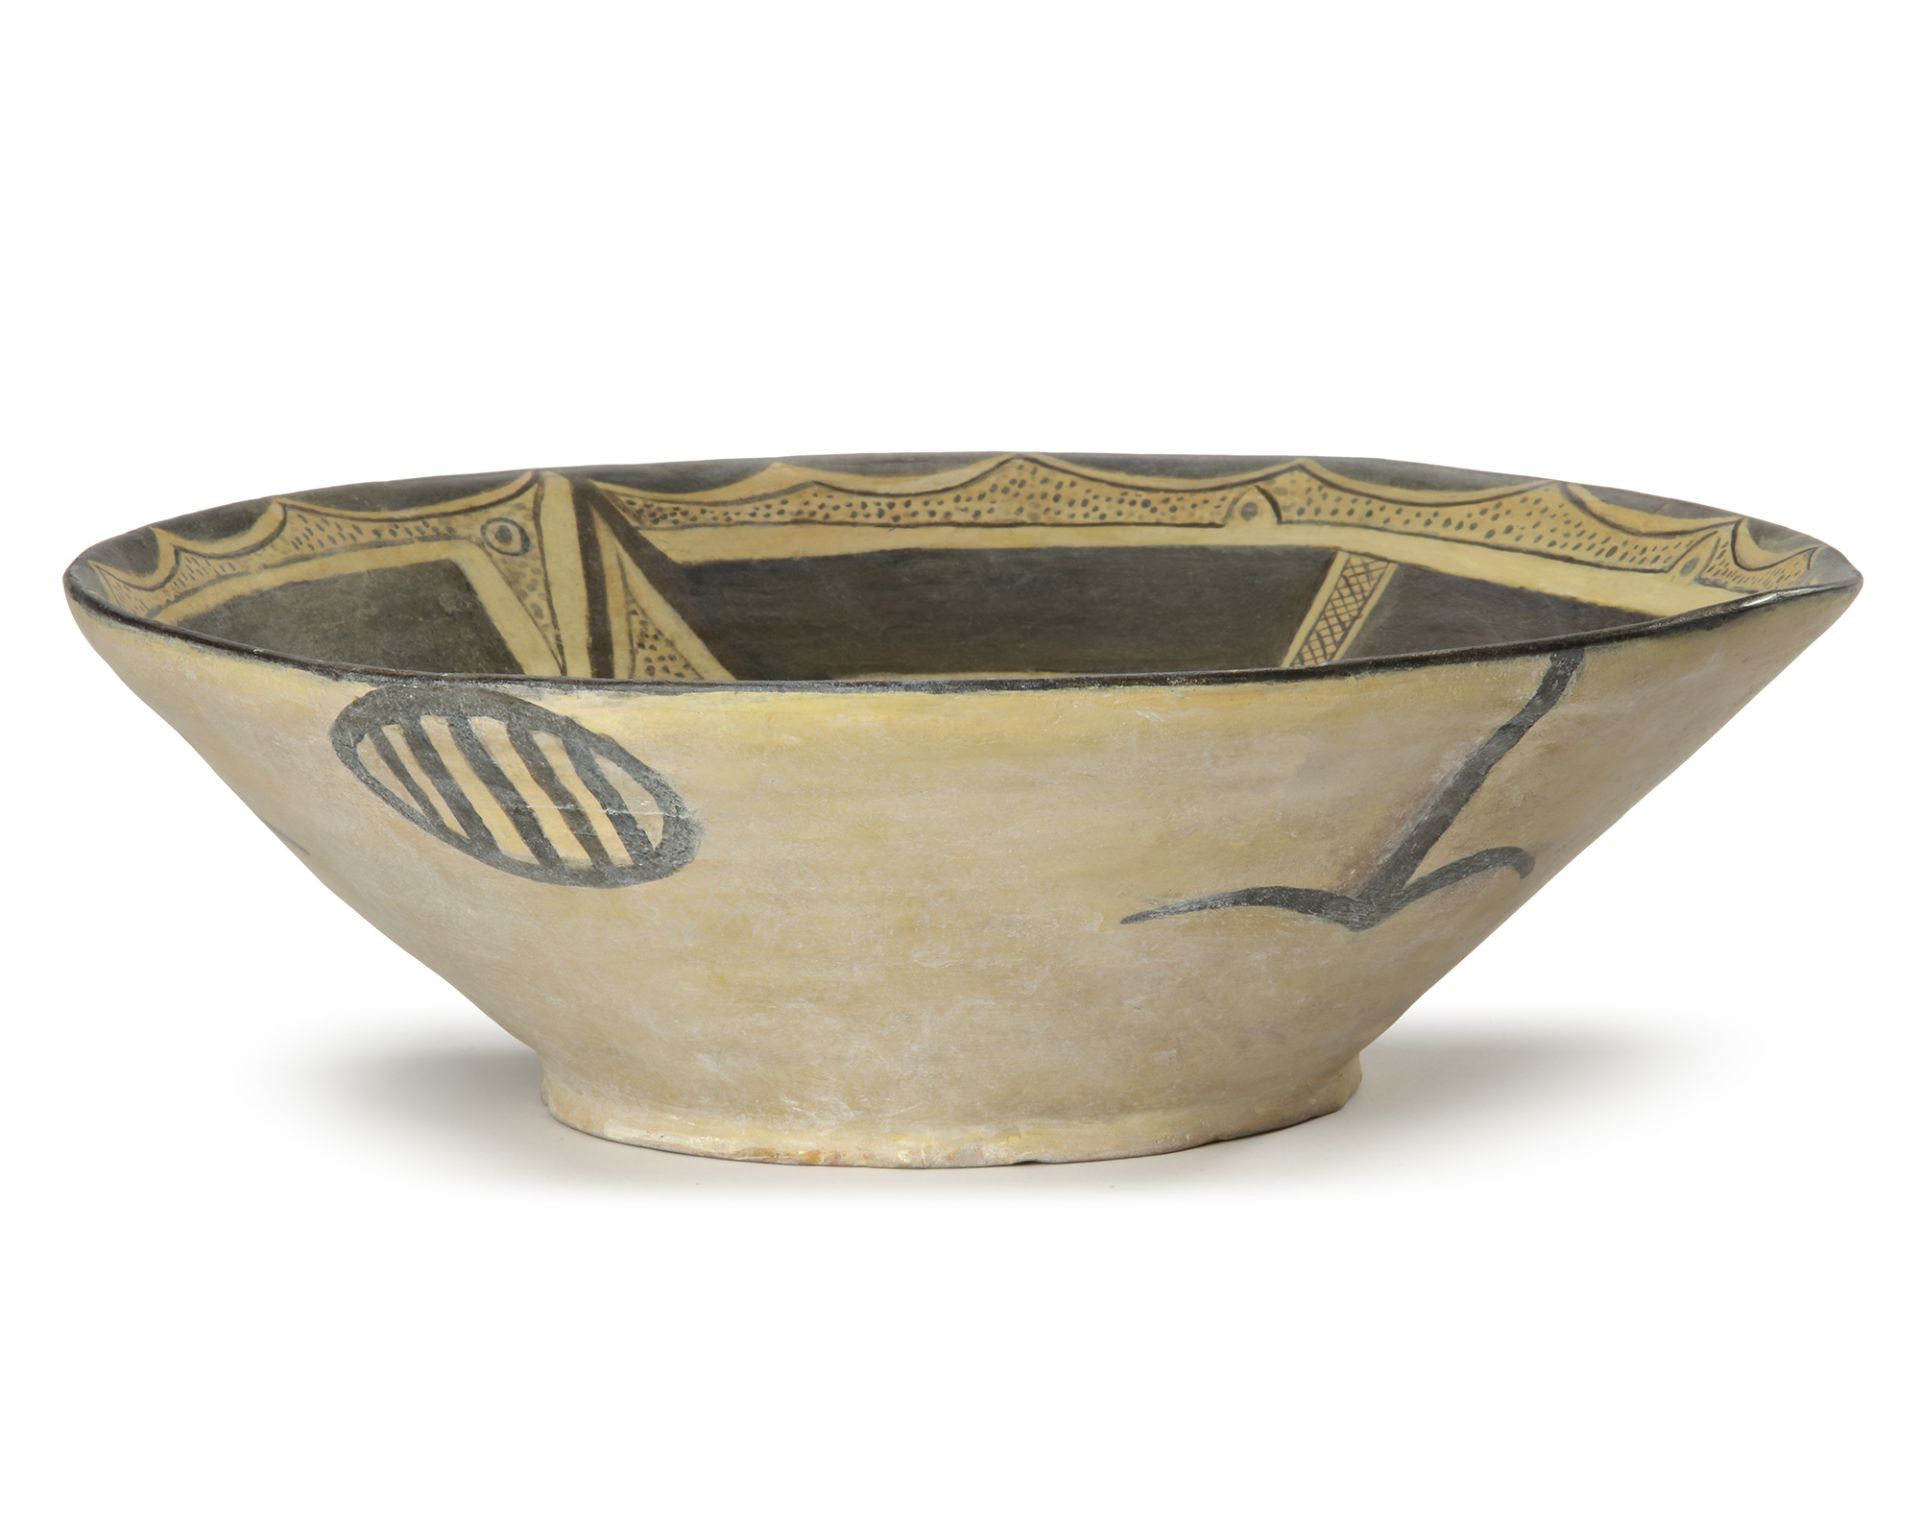 A NISHAPUR POTTERY BOWL, EASTERN PERSIA, 10TH CENTURY - Image 7 of 10